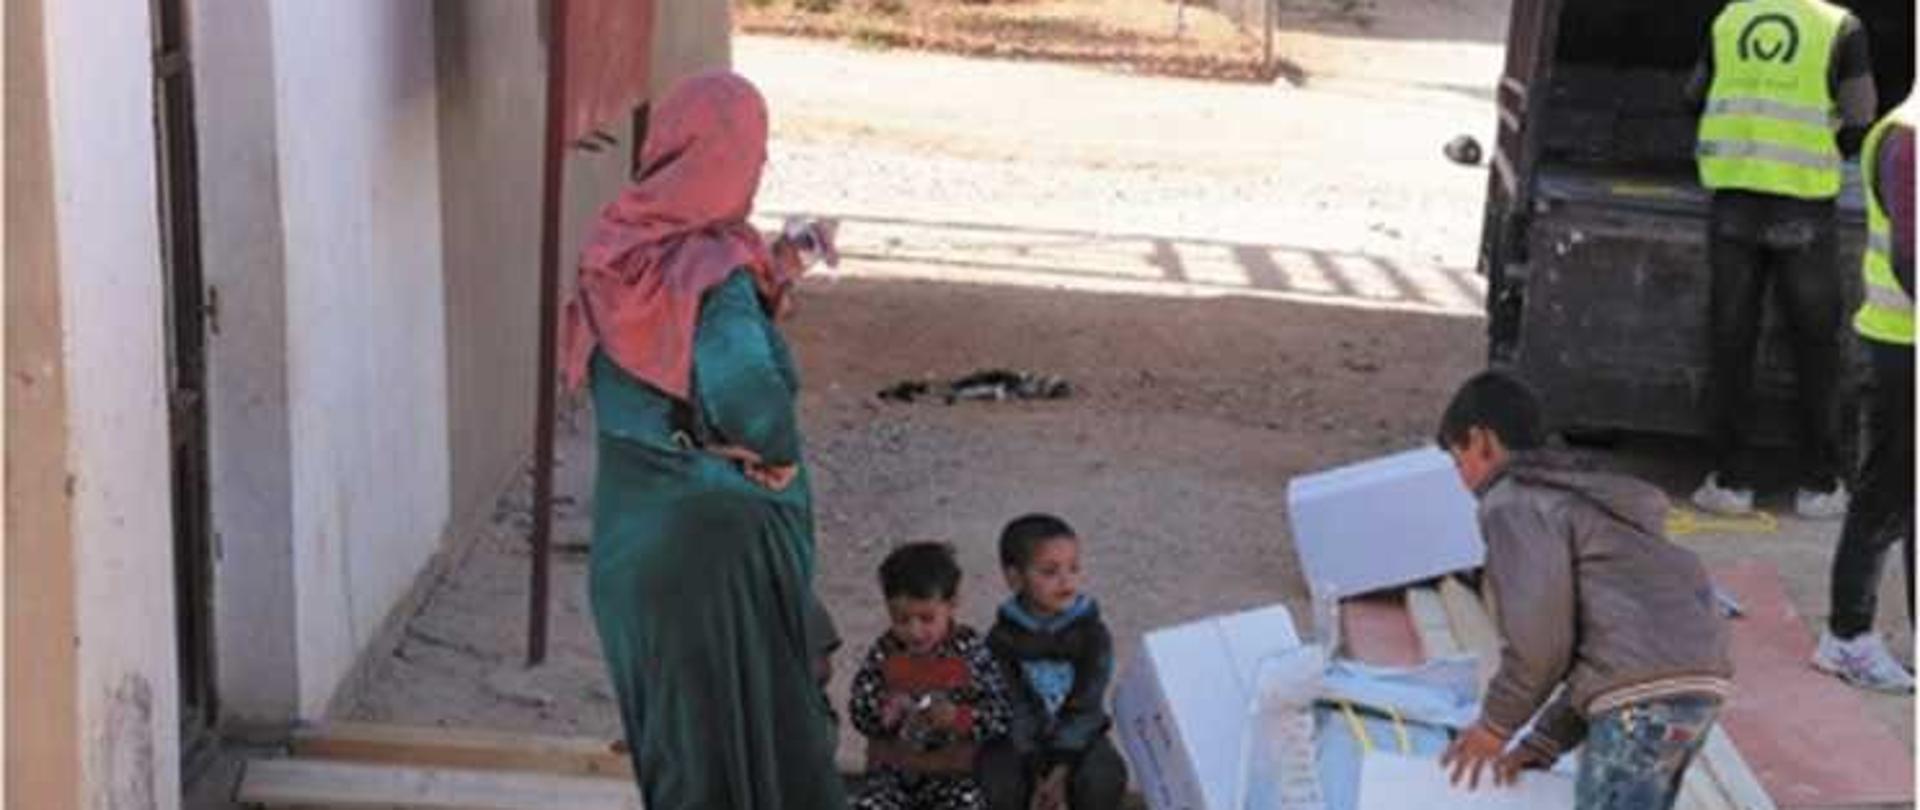 Shelter and education assistance for Syrian refugees and vulnerable population in Lebanon